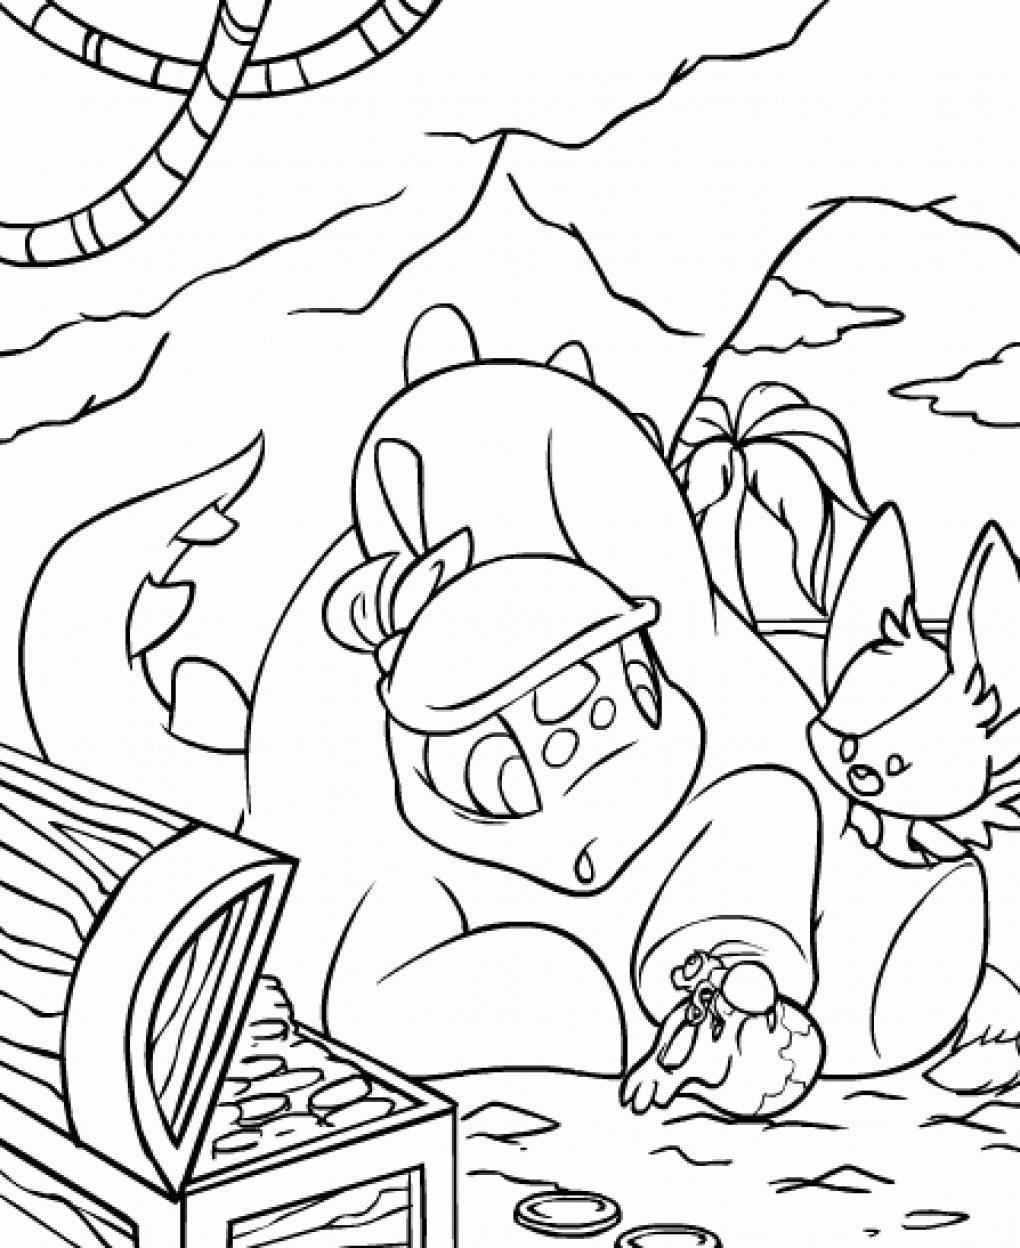 Download Free Printable Neopets Coloring Pages For kids